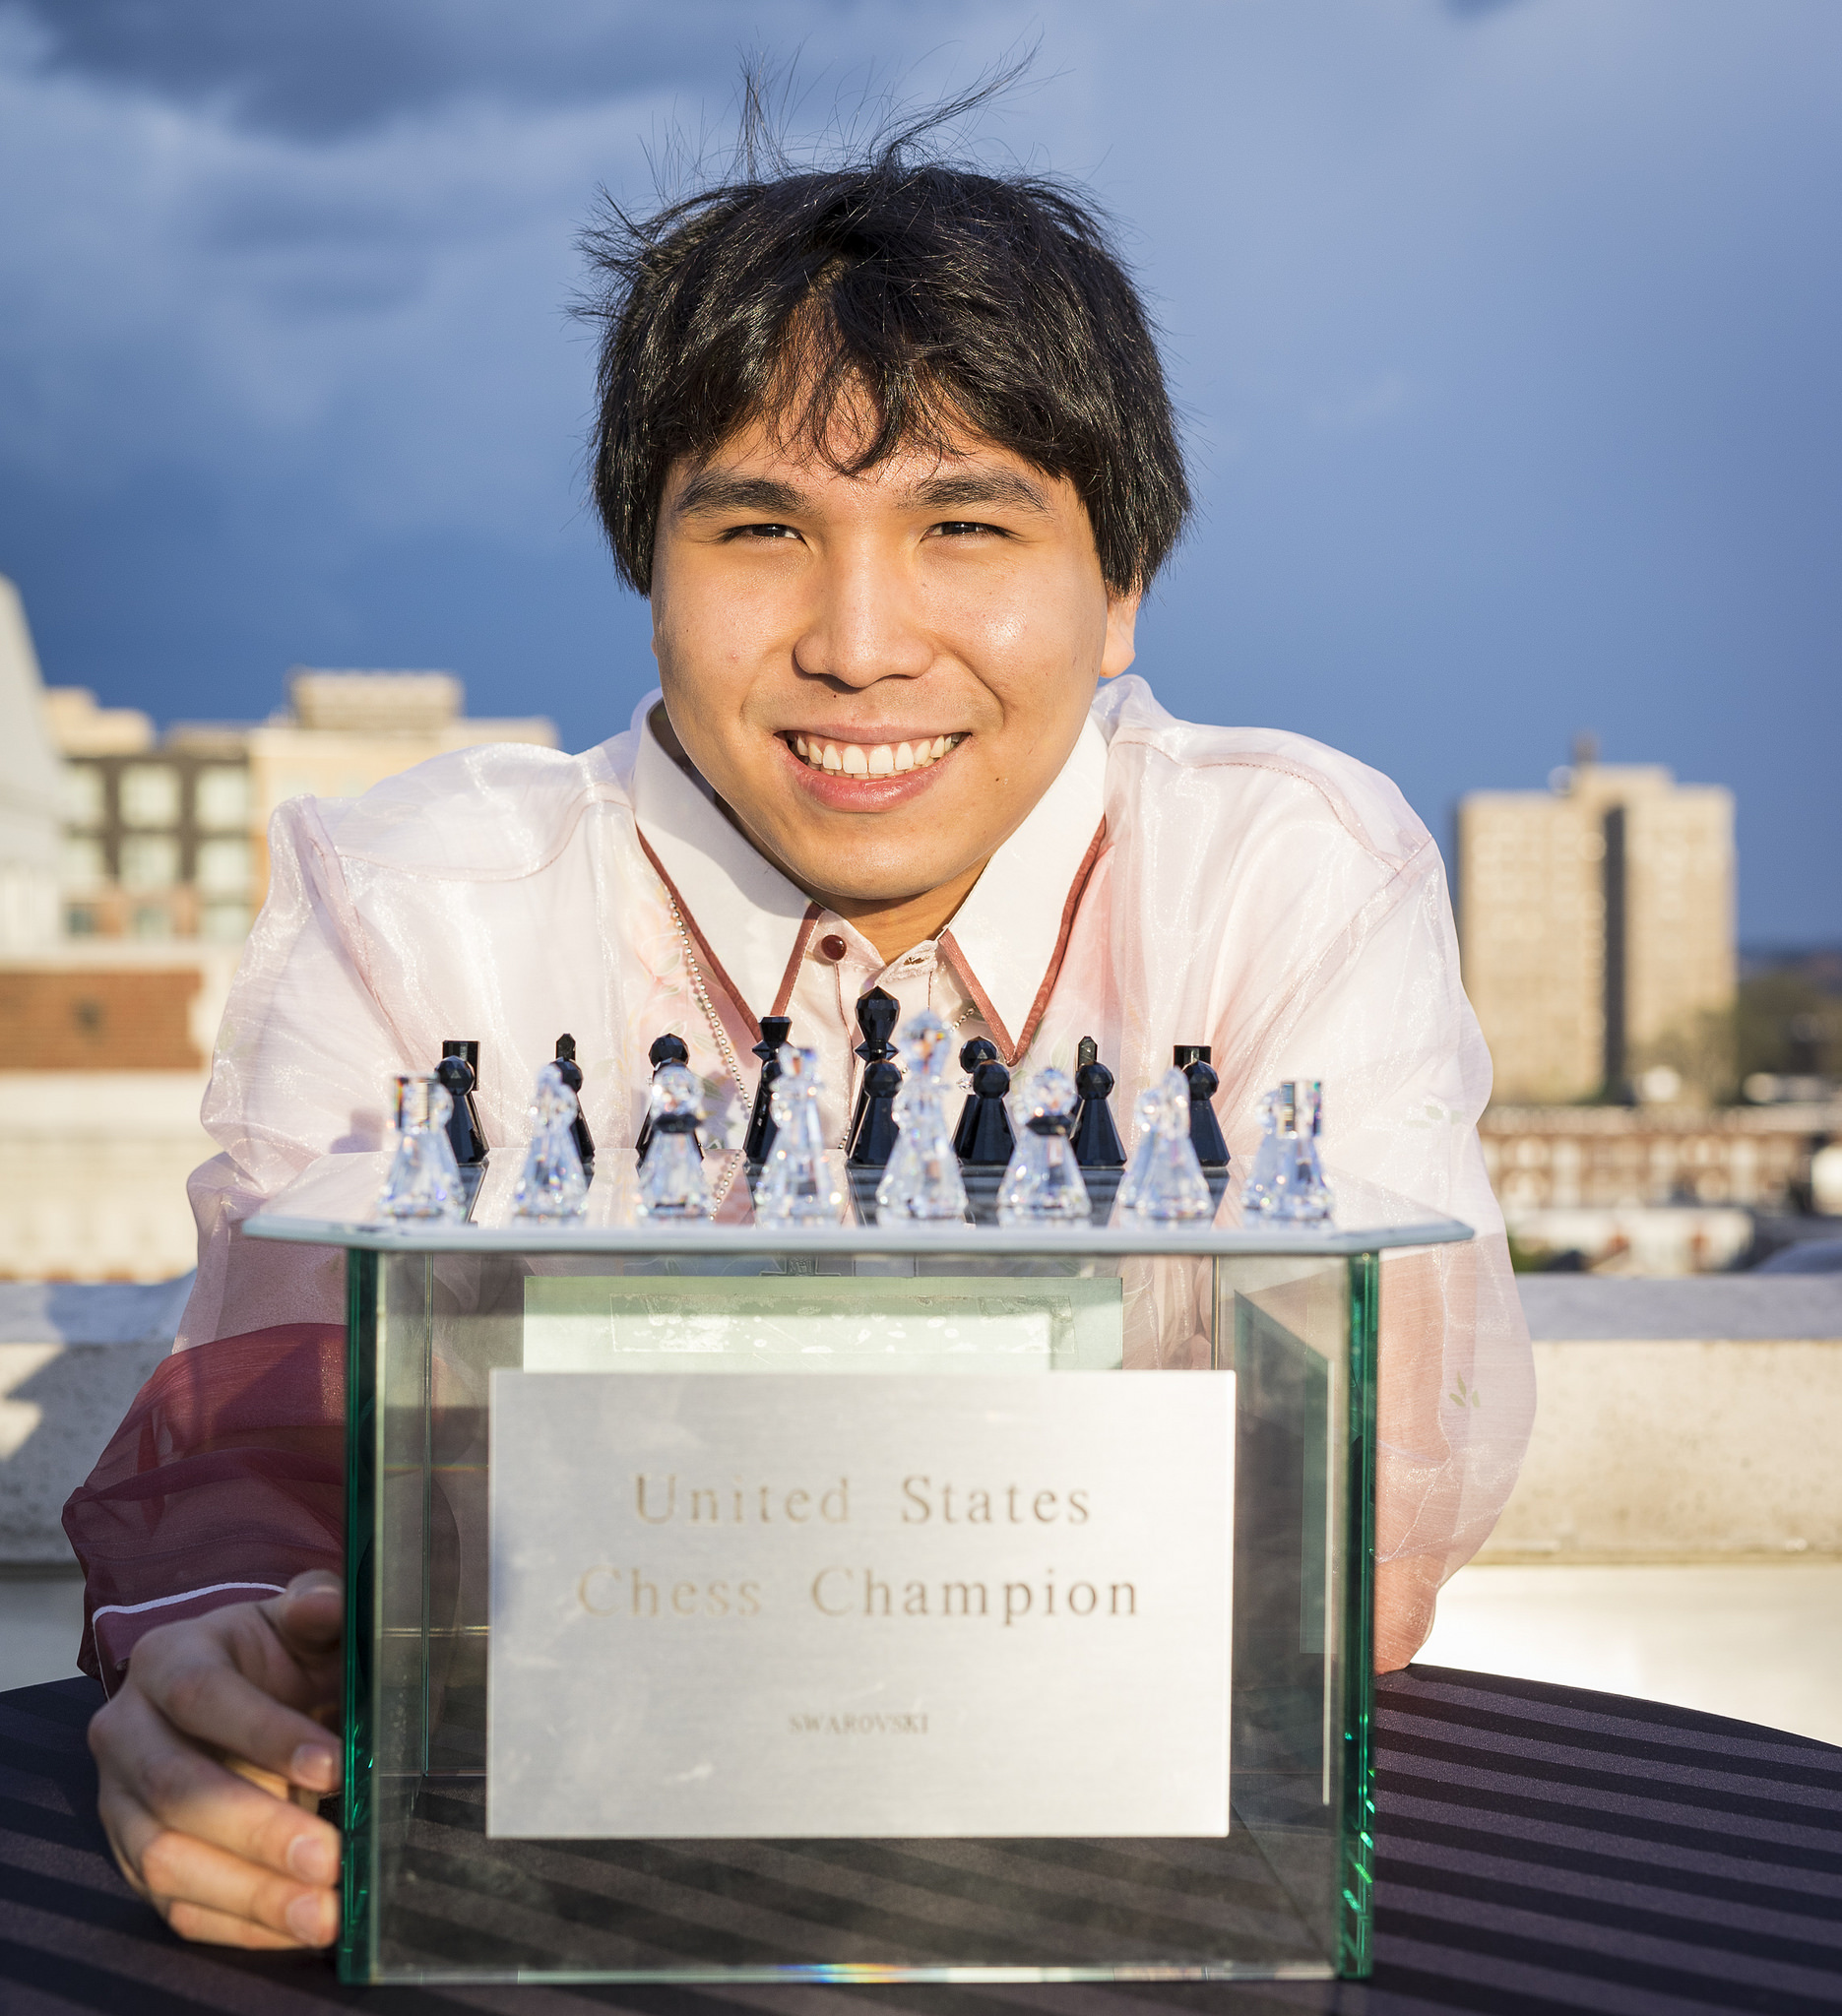 FIDE - International Chess Federation - Happy Birthday, Wesley So!🎉  Currently world's #8 with 2767, So won numerous tournaments including  Millionaire Chess 2014, Bilbao 2015, Tata Steel 2017. In 2017, he became